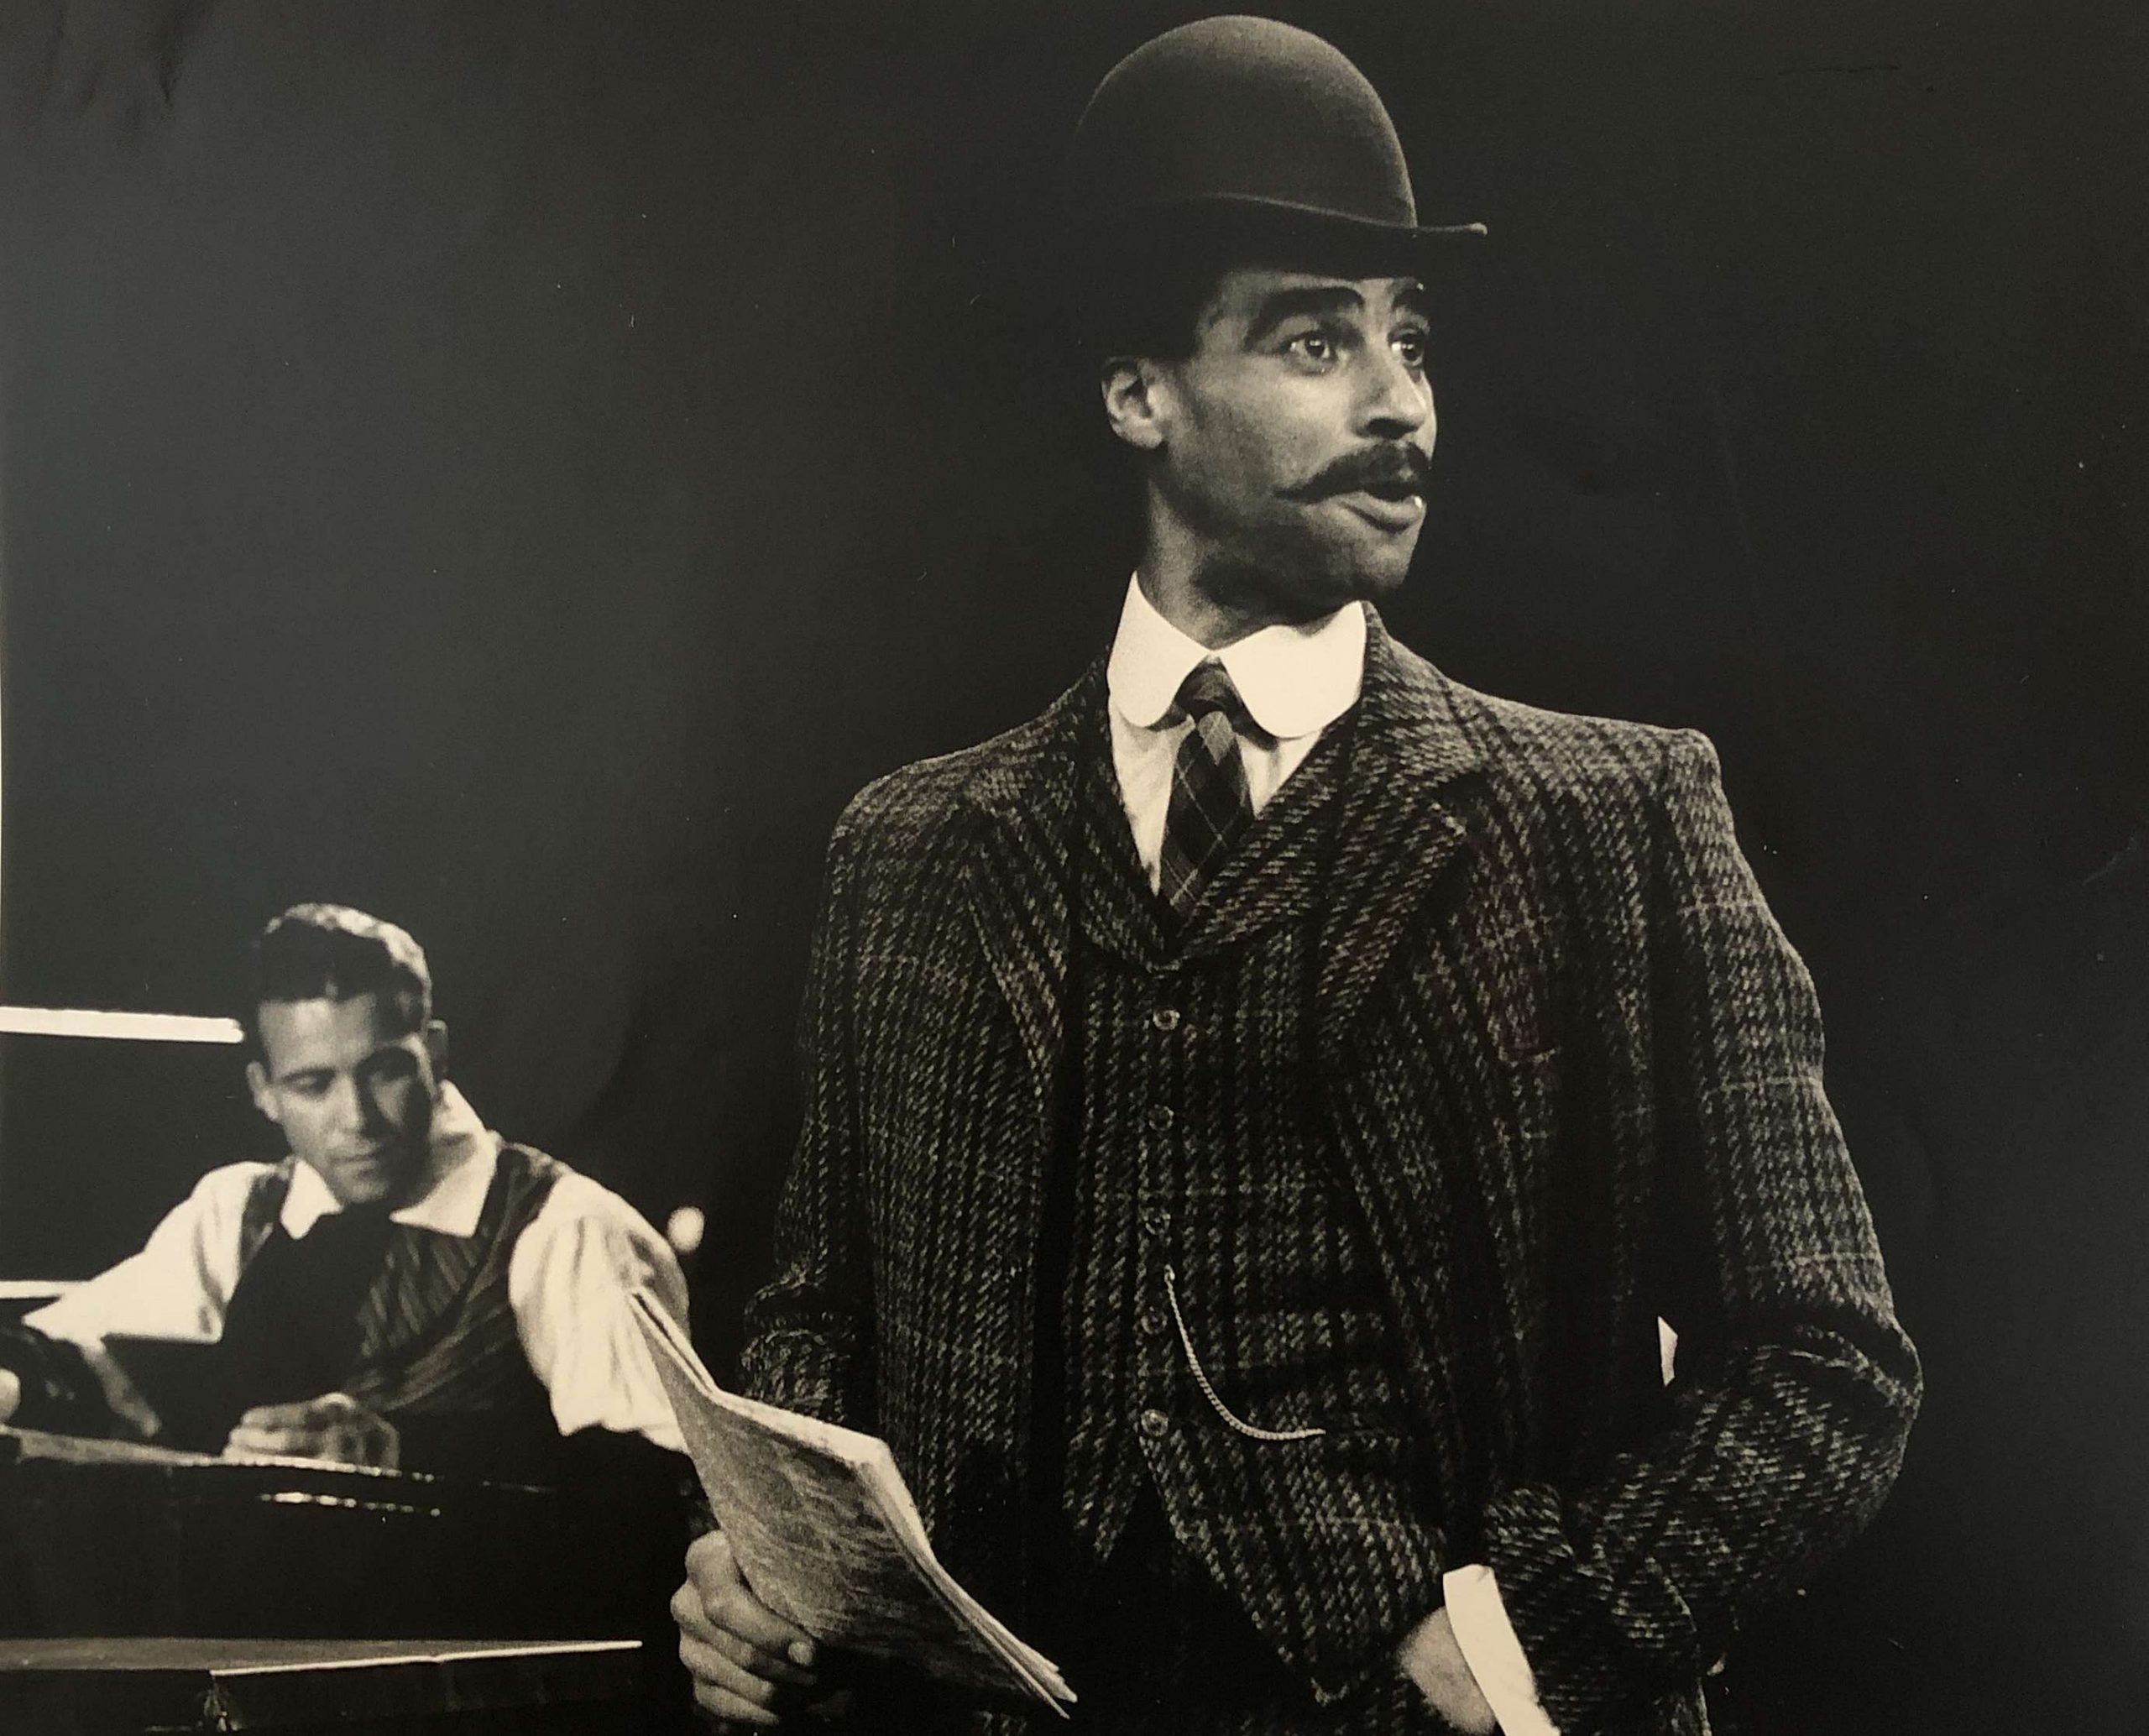 L-R: Billy Braham and Ben Thomas in THE TICKET-OF-LEAVE MAN by Tom Taylor, directed by Philip Hedley, 1987